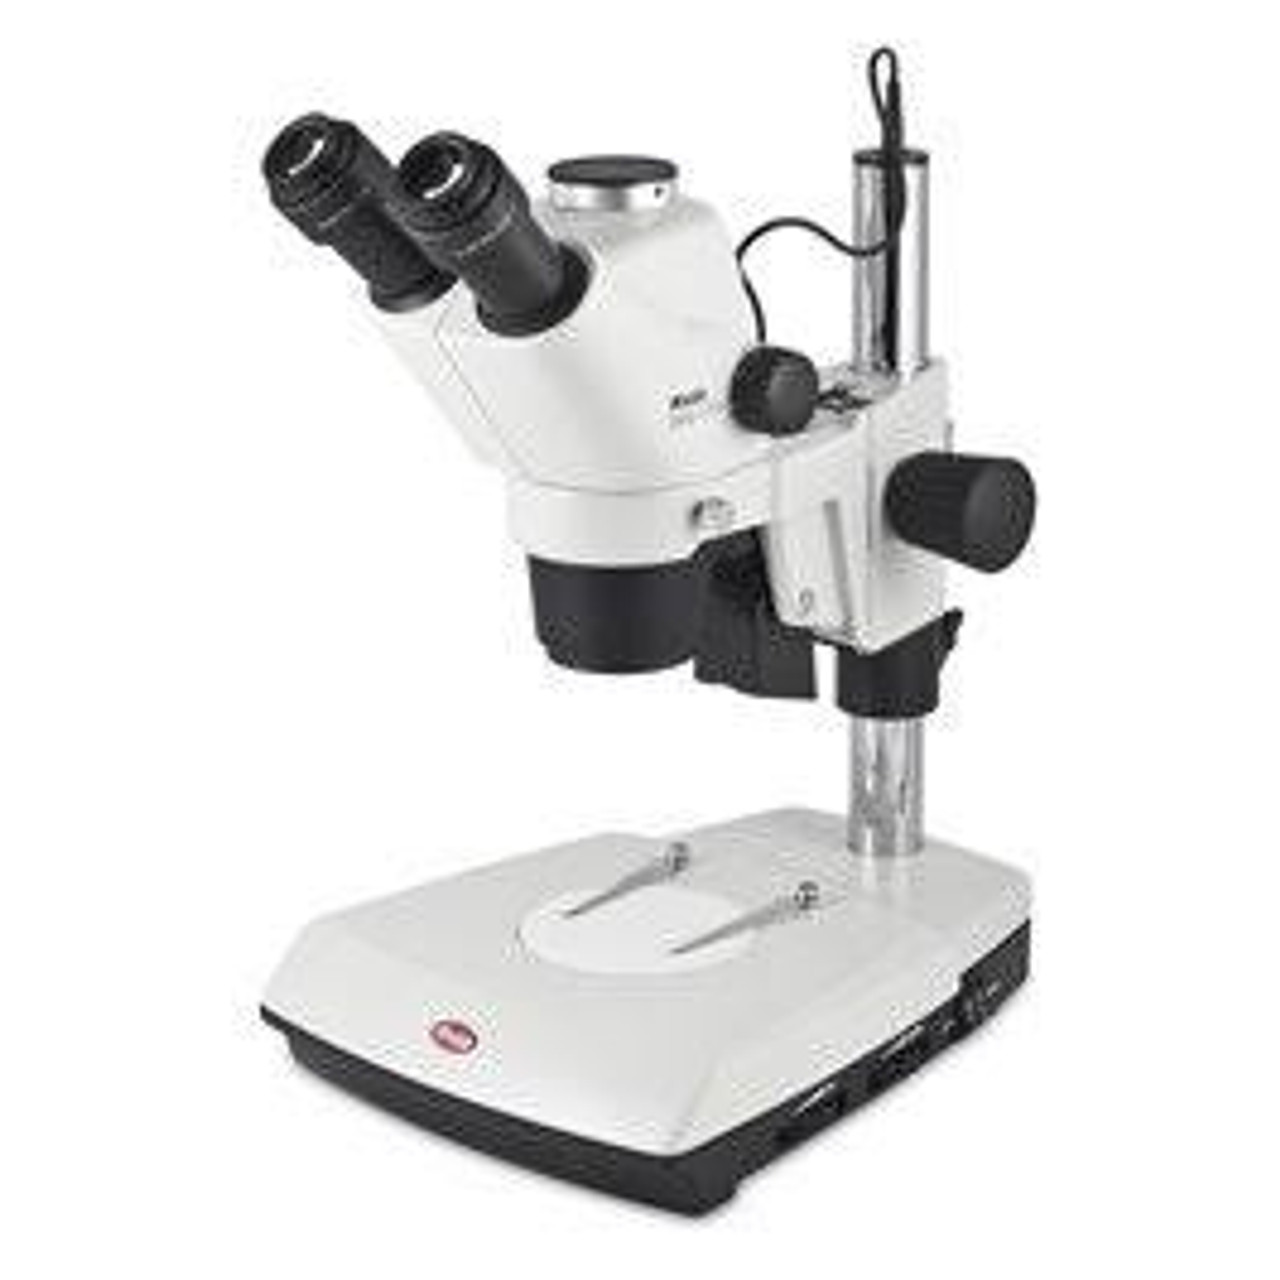 Motic Smz 171 Tled Stereo Trinocular Microscope With Led Incident And